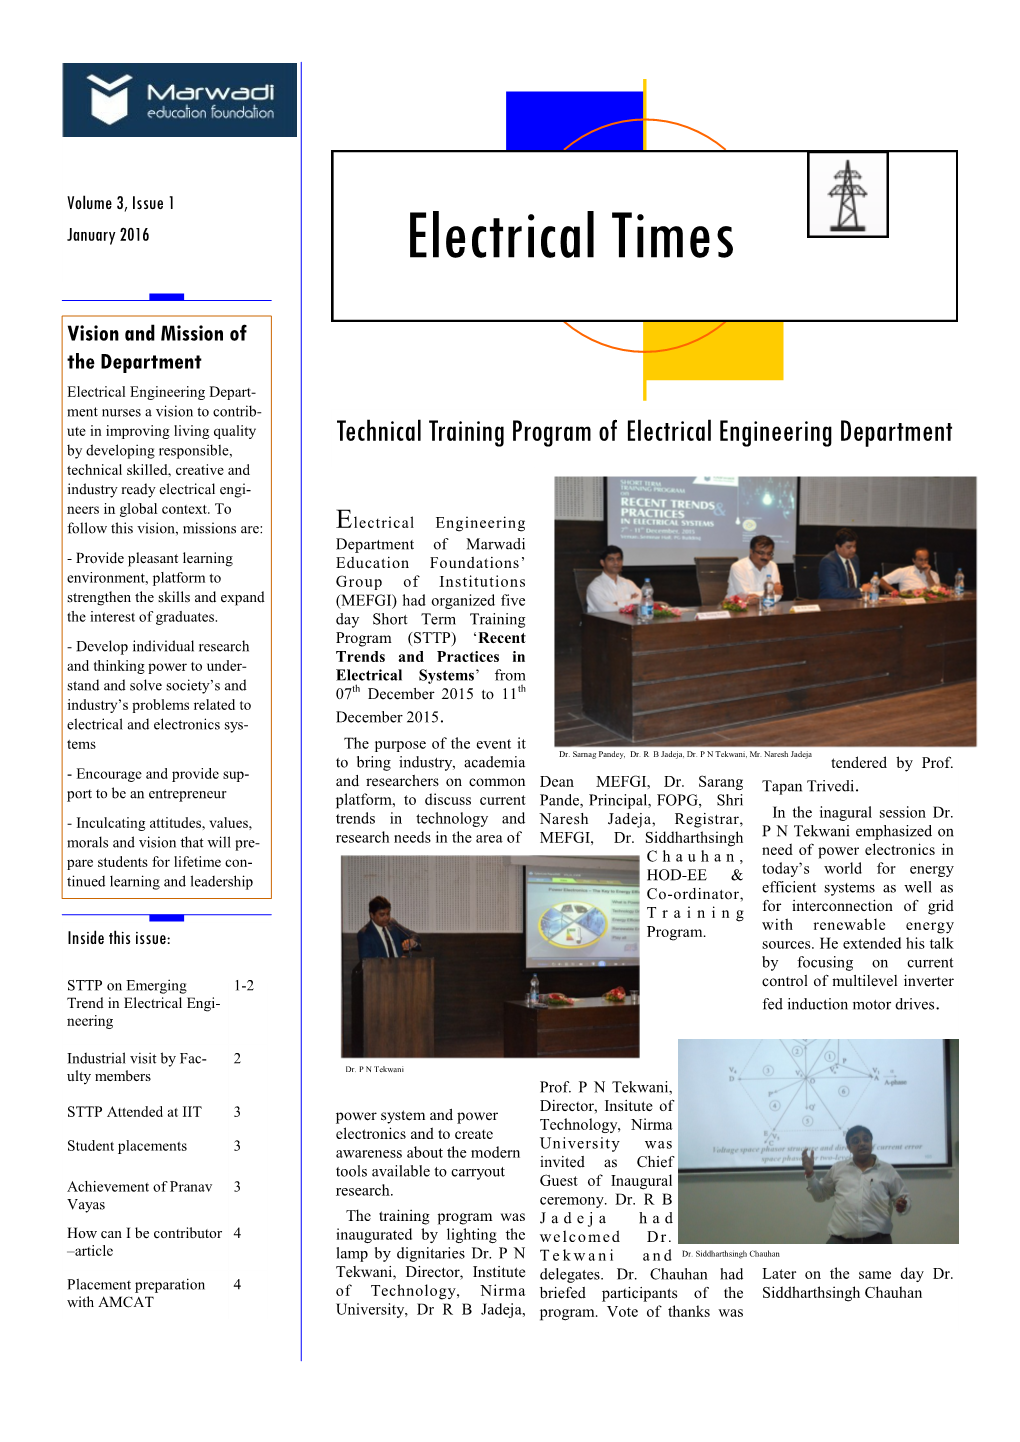 Newsletter Vol3 Issue1 January